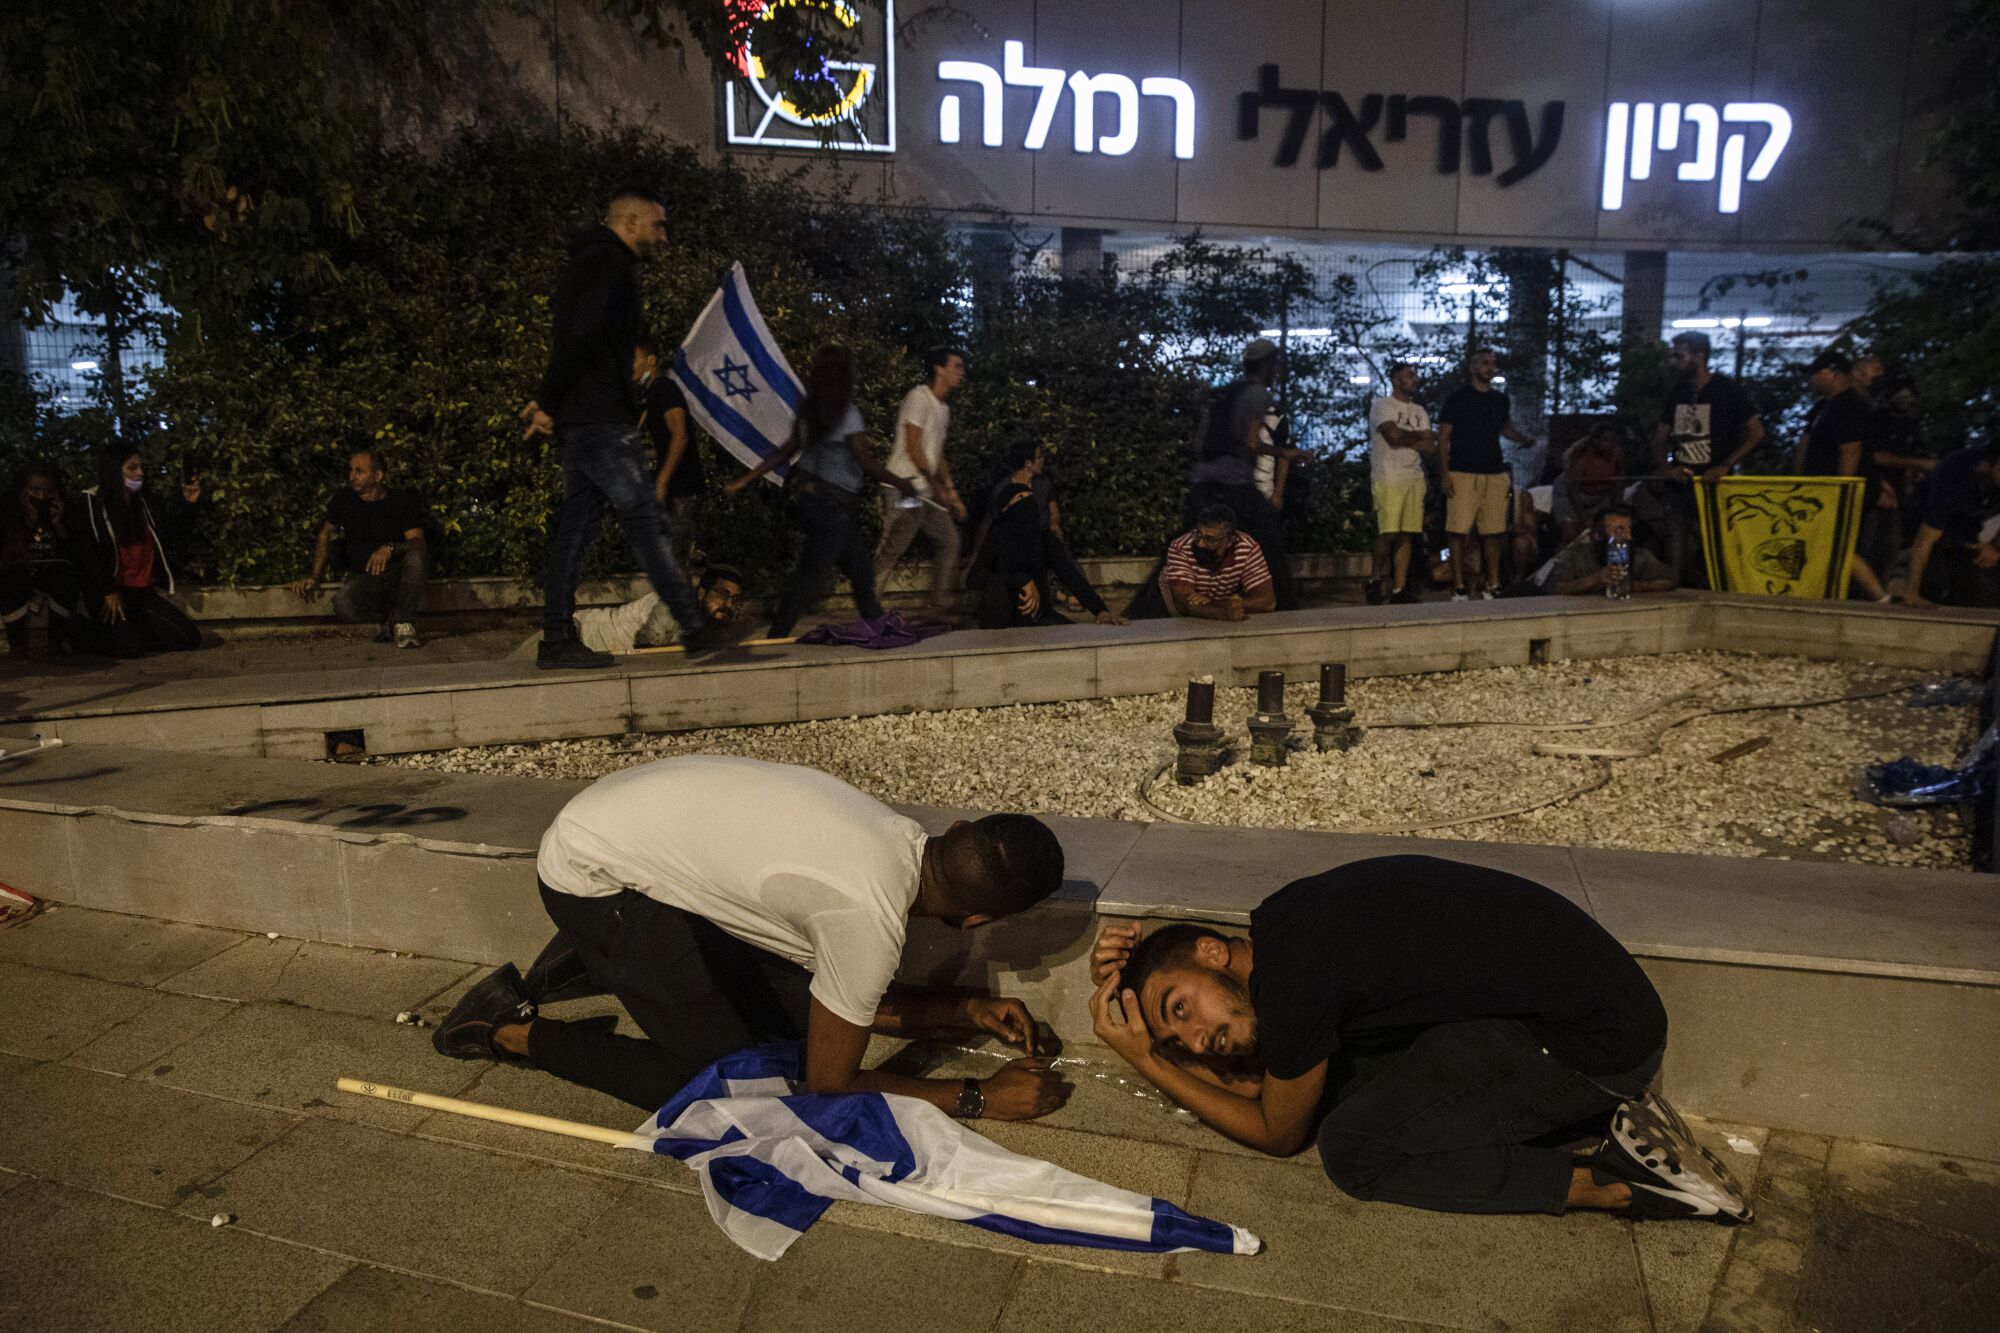 People, some with Israeli flags, take cover while others remain standing nearby